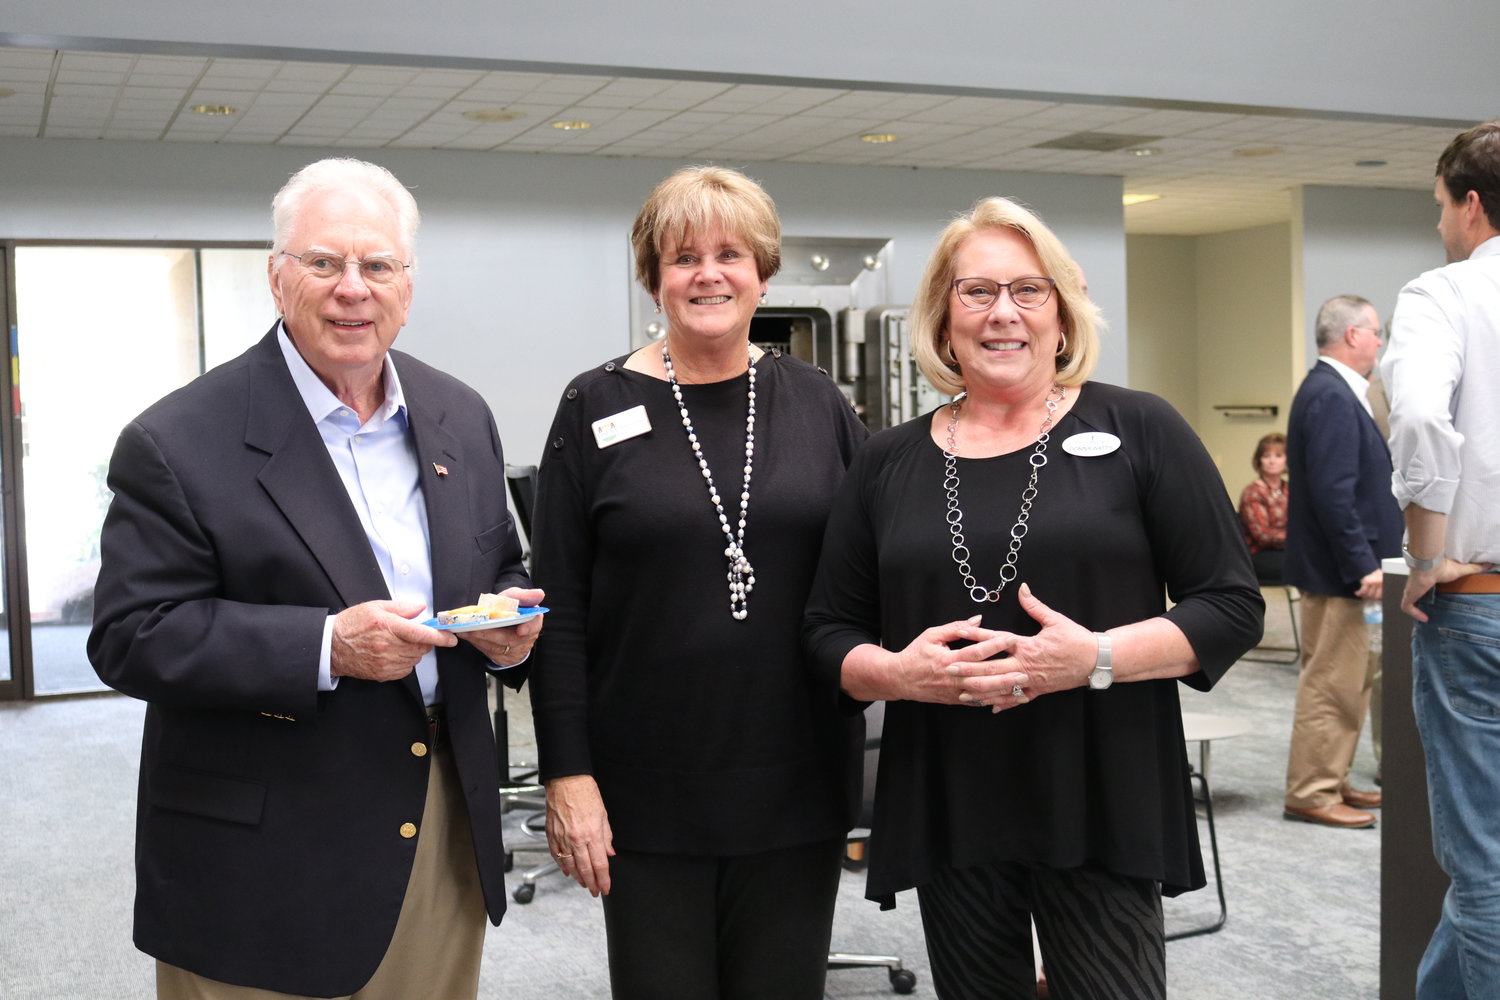 Foley councilman Dick Dayton, Foley Main Street Executive Director Darrelyn Dunmore, and South Baldwin Chamber of Commerce CEO Donna Watts.